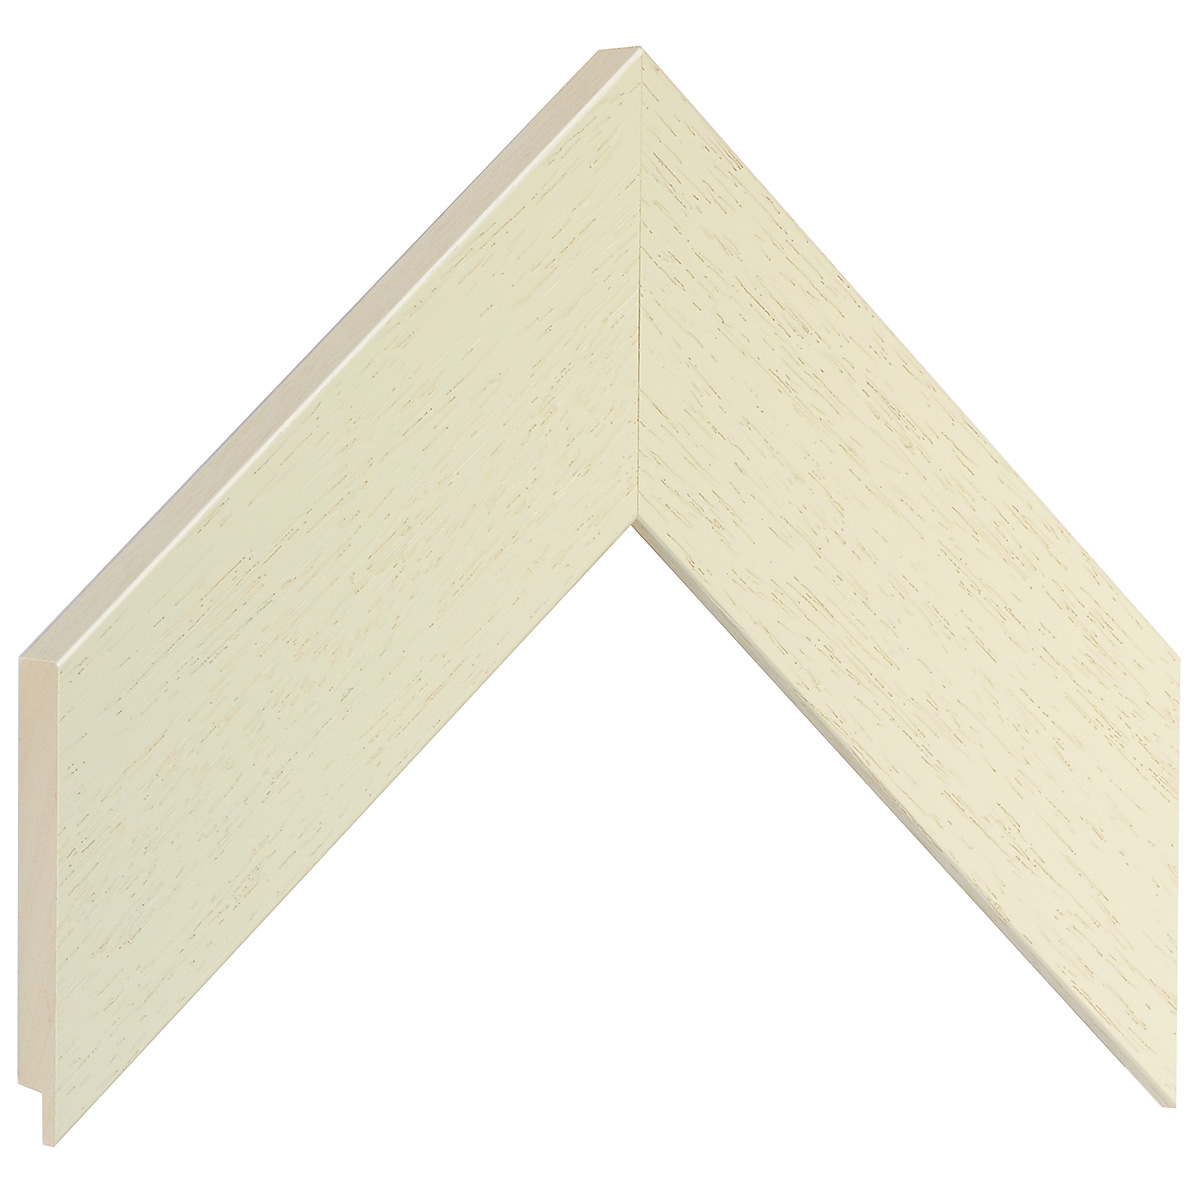 Moulding ayous - Width 58mm Height 20 - Cream  - Sample